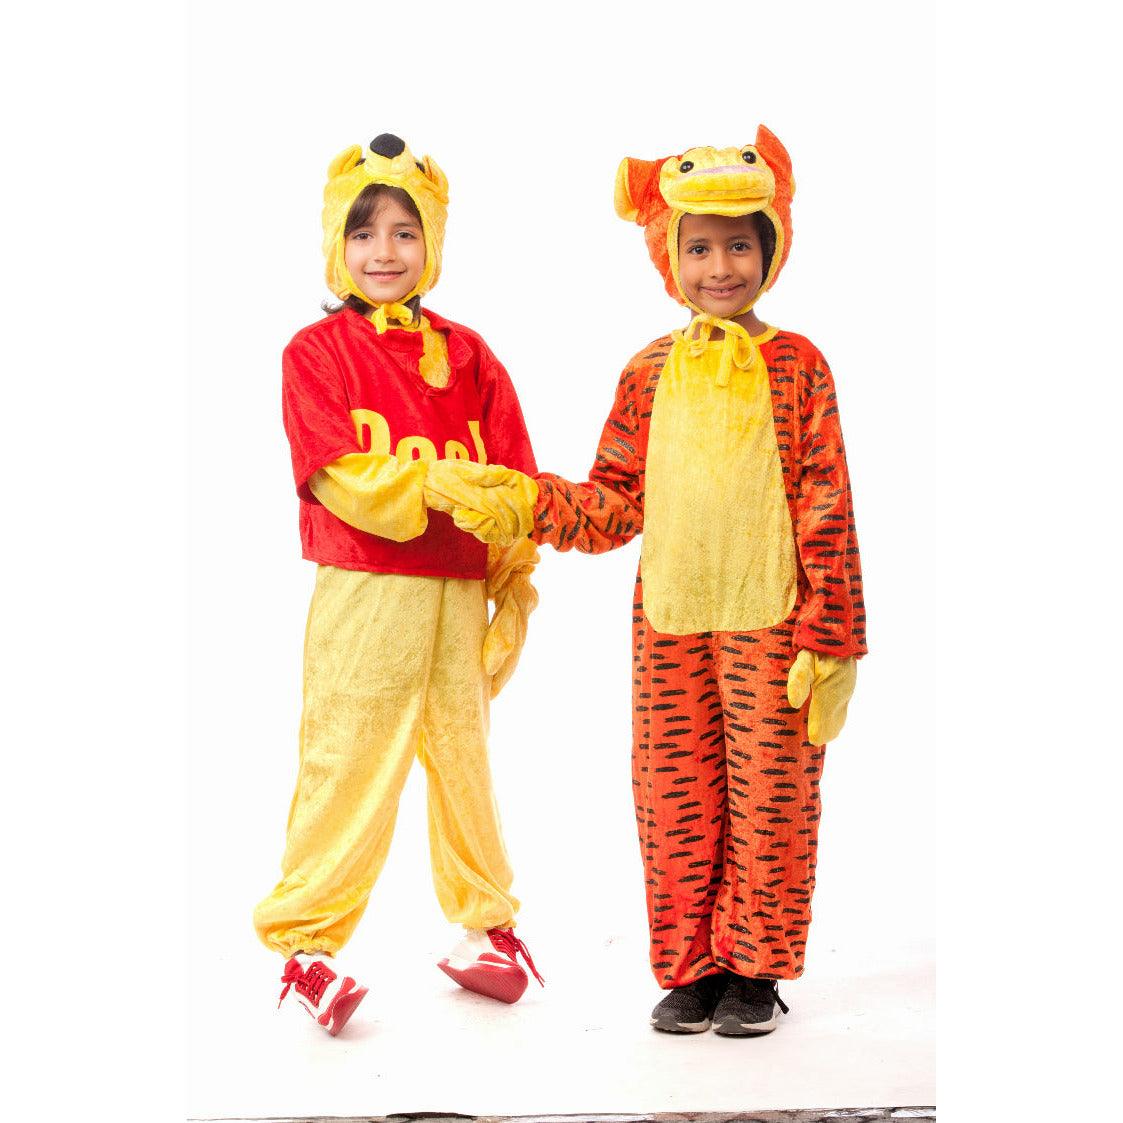 Winnie The Pooh Costume - Ourkids - M&A